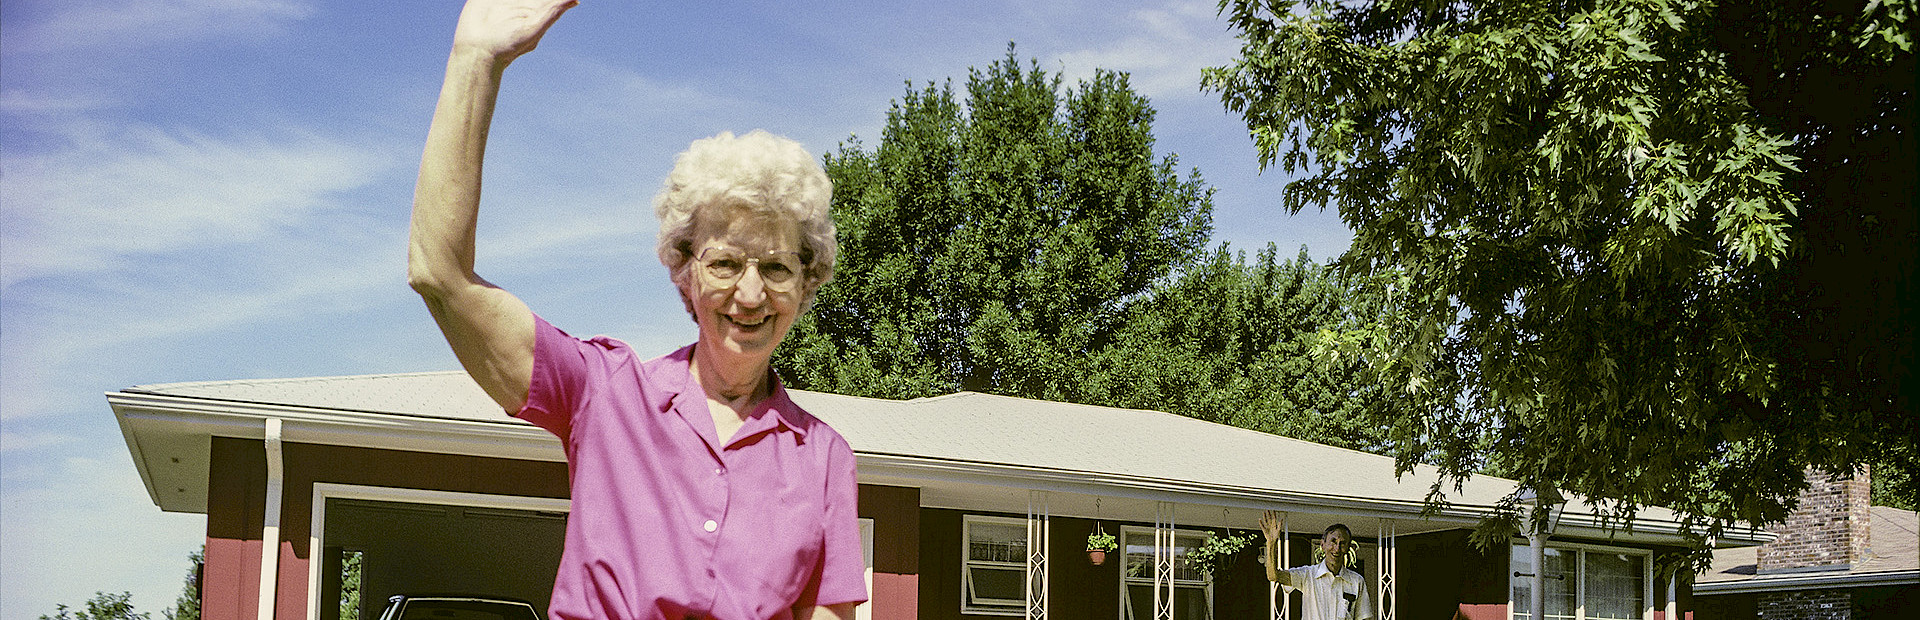 Photo of a woman standing in the driveway of a red house waving.